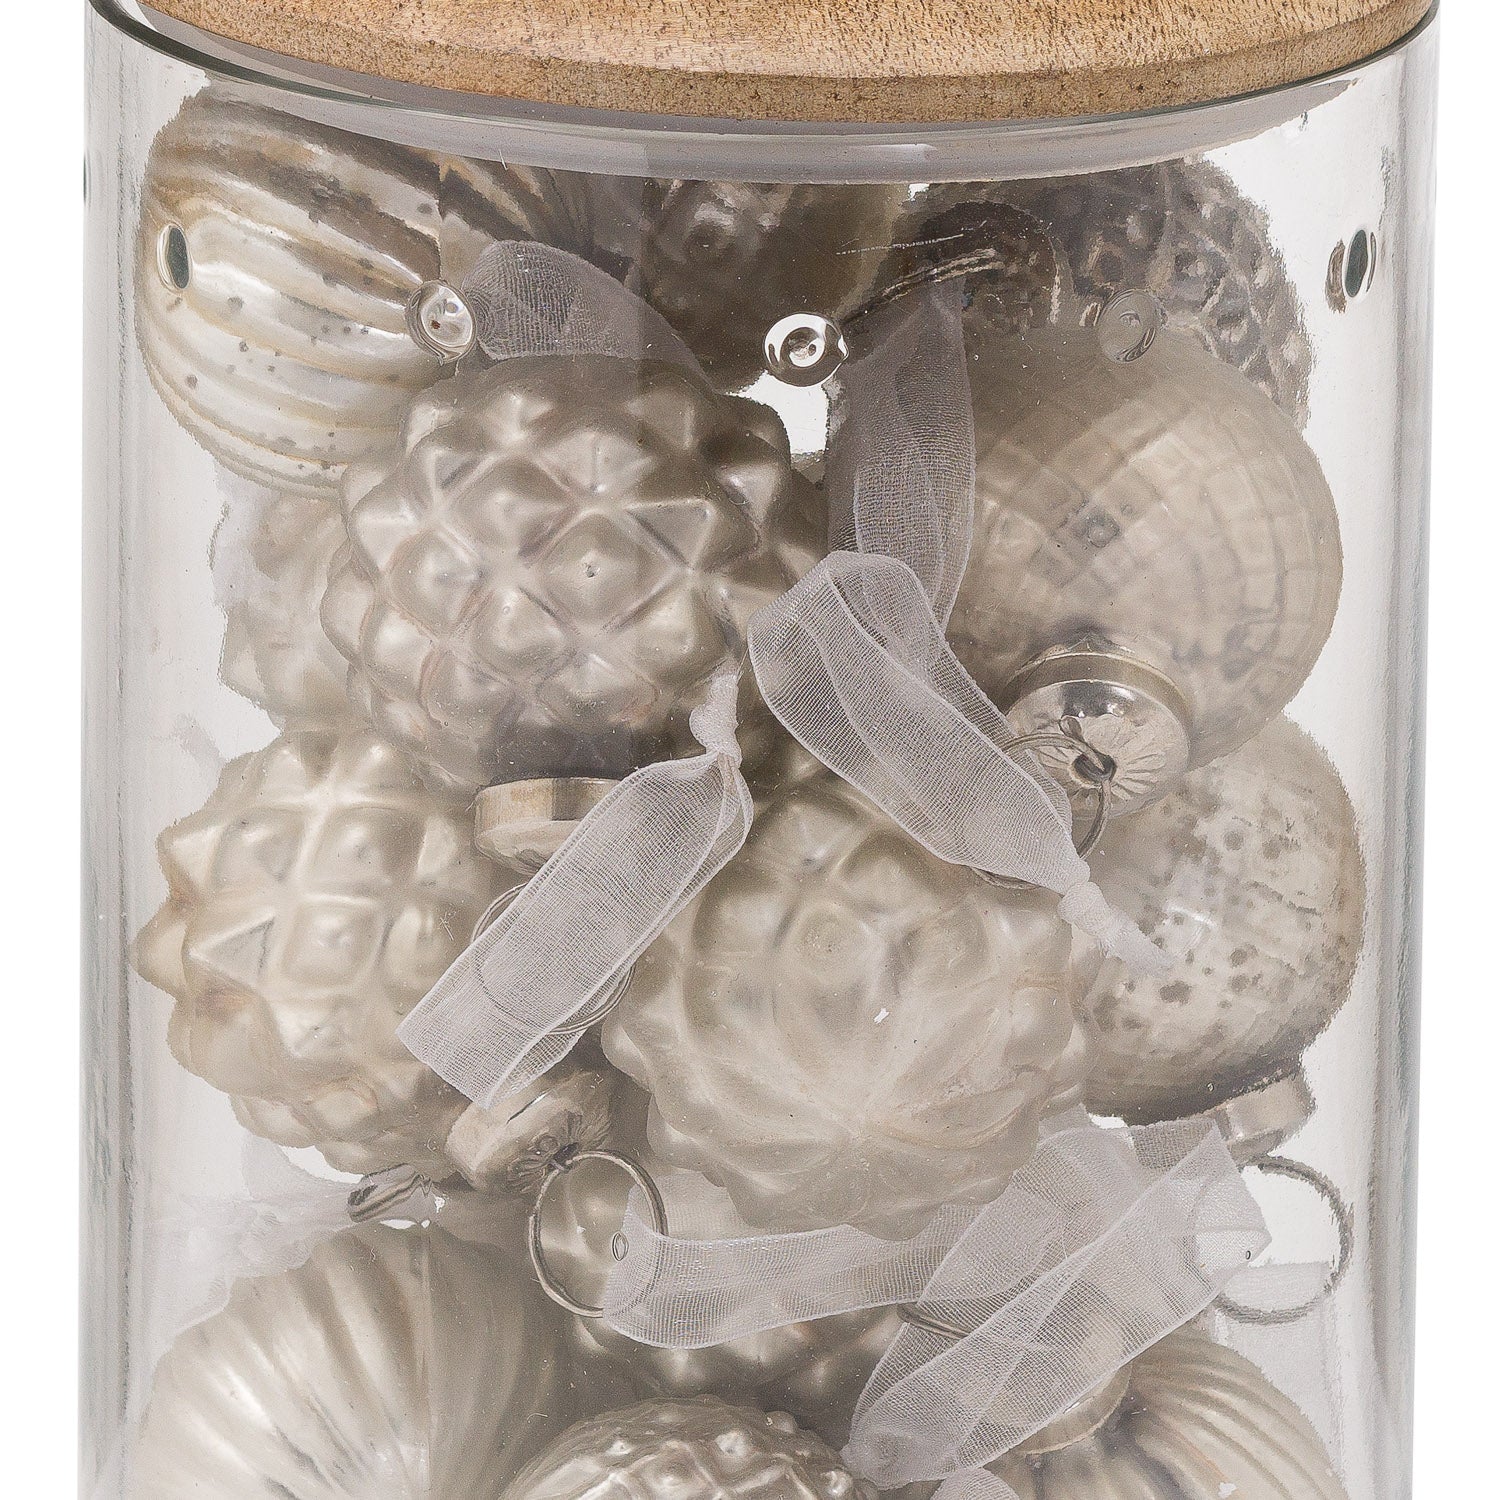 Set Of 12 Silver Hanging Decorations In Display Jar